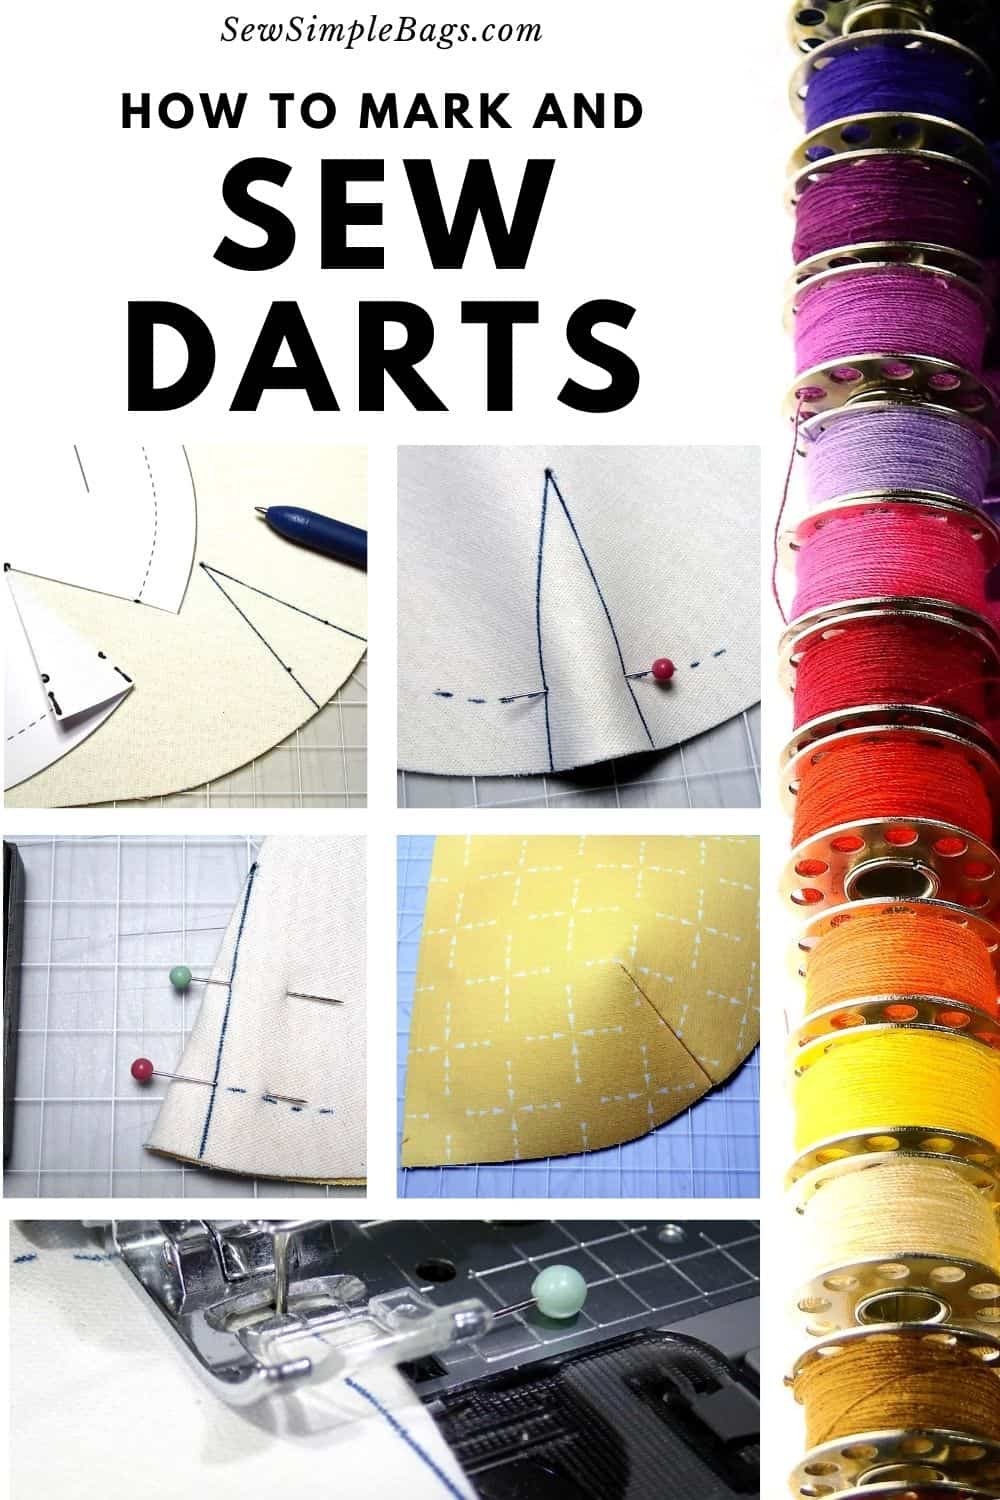 Rub Off a Pattern from Pants with Darts